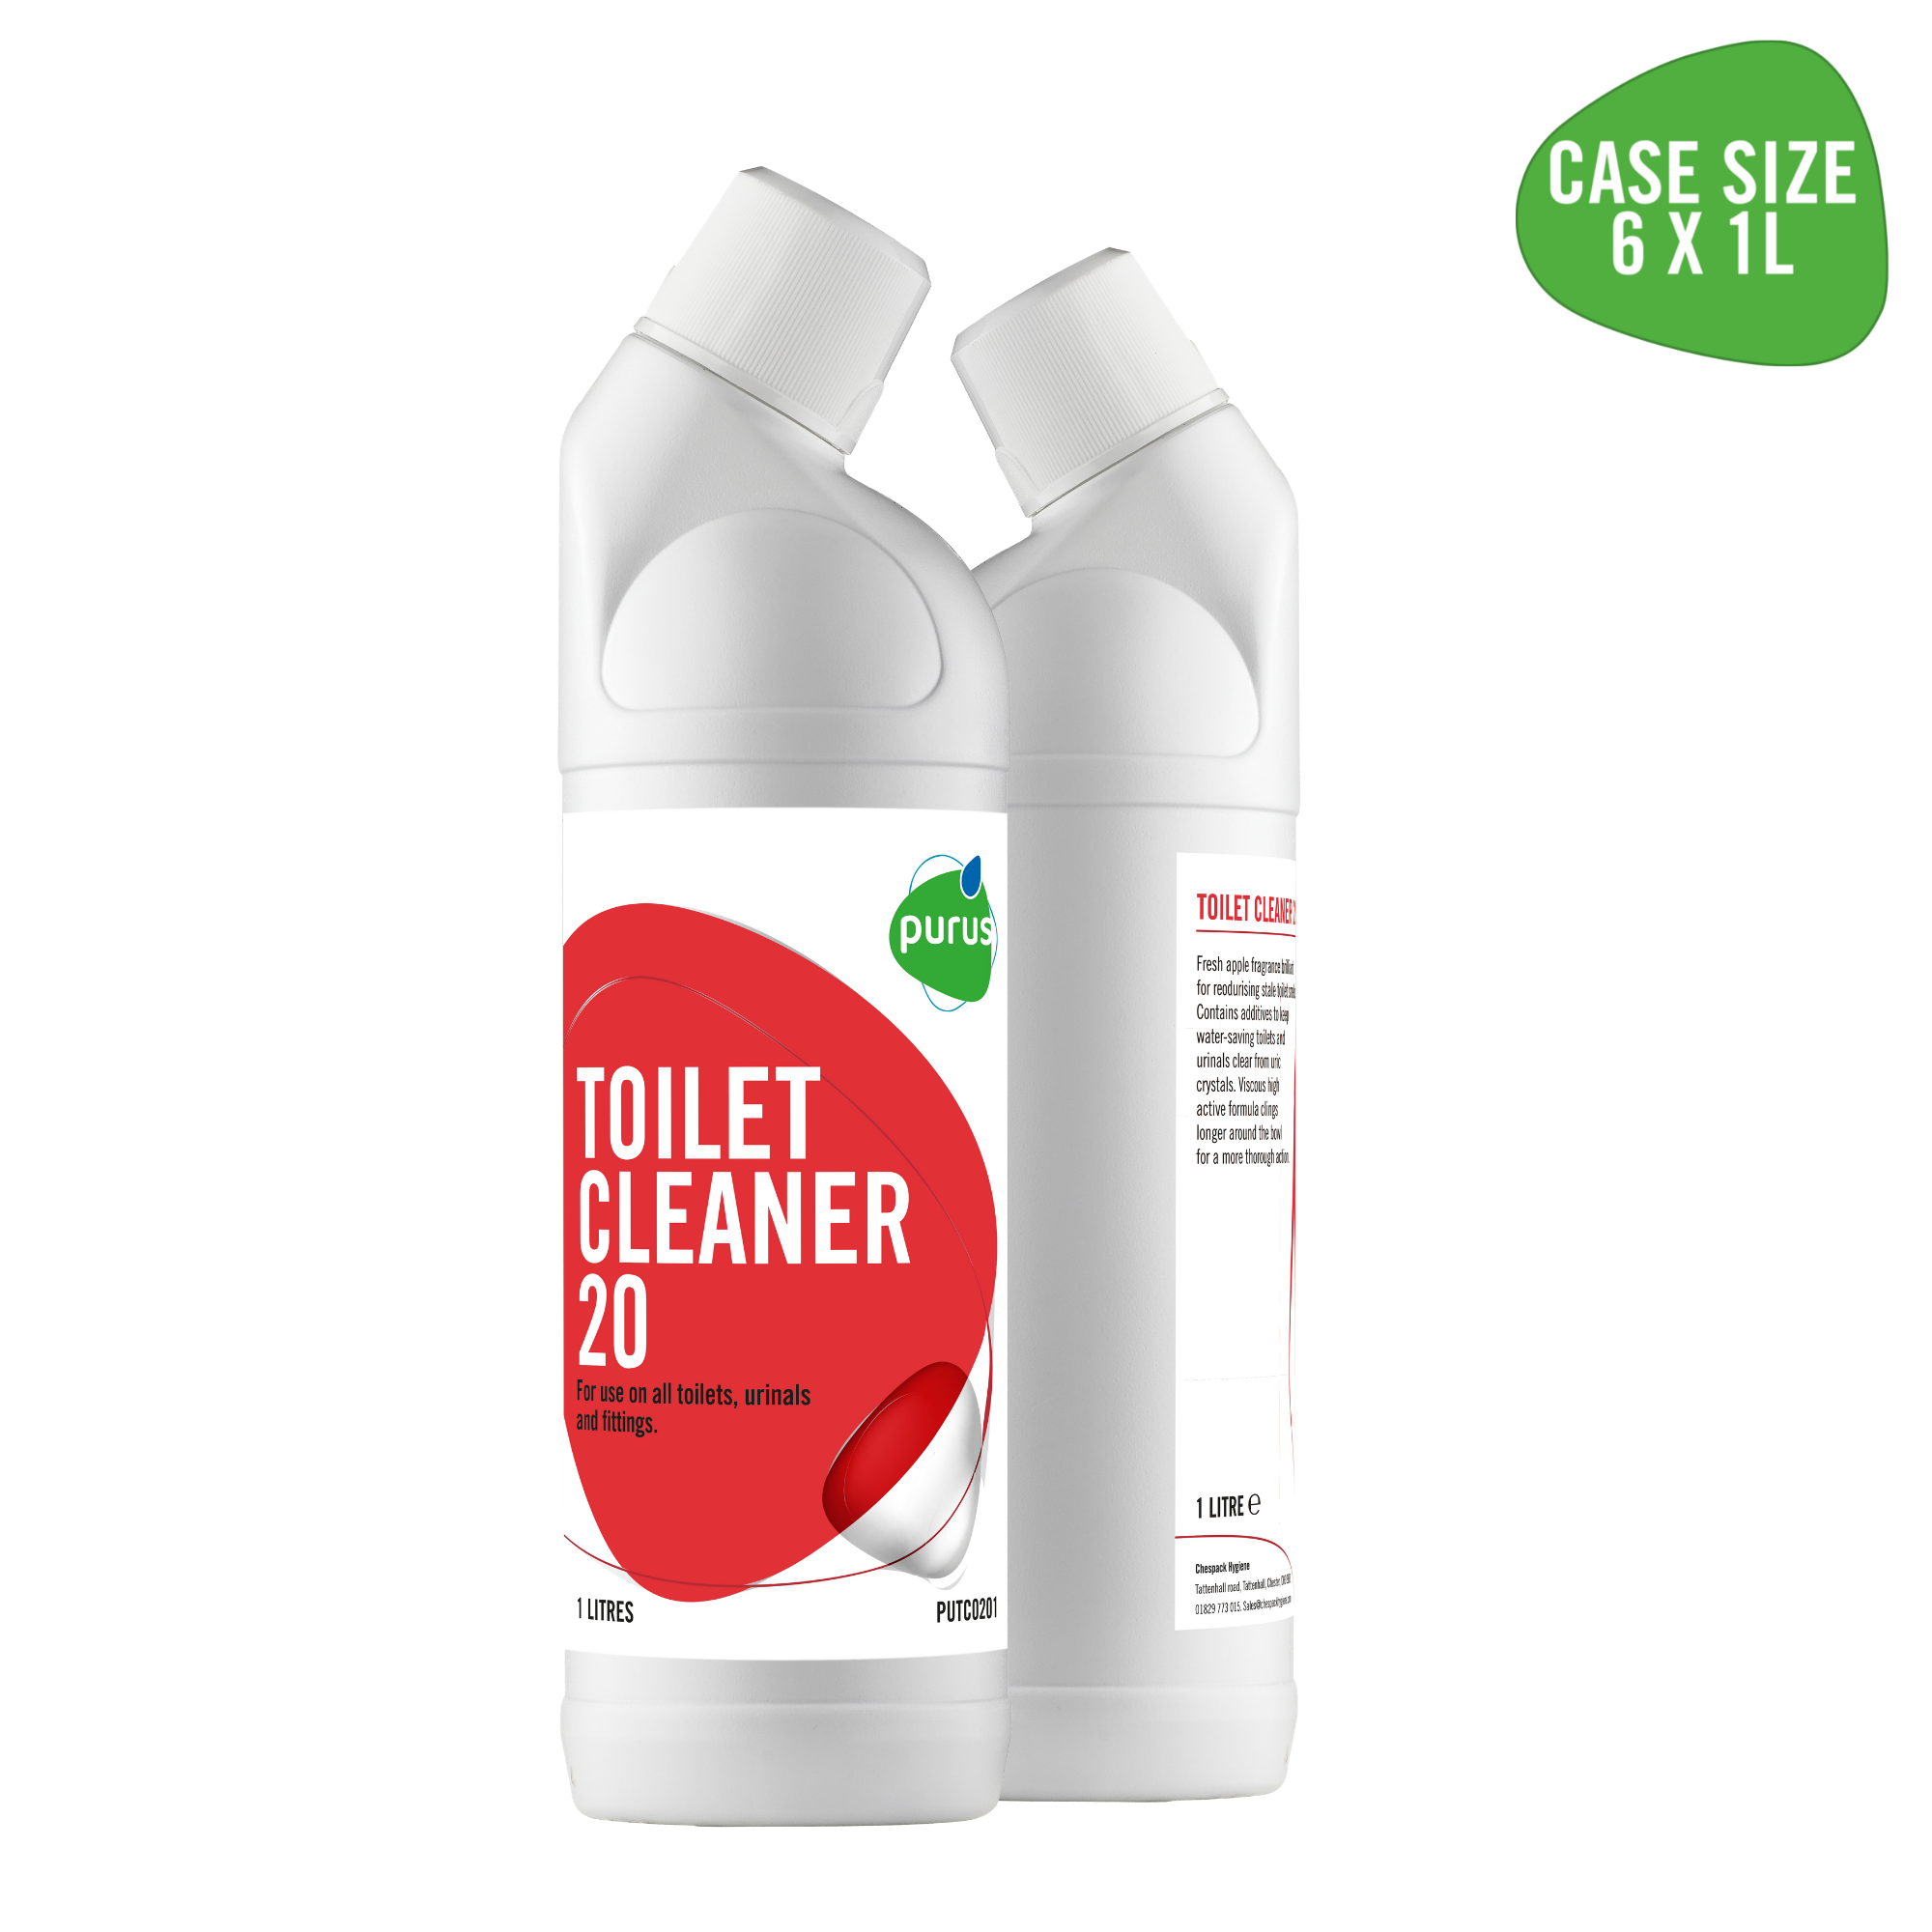 Purus Toilet Cleaner 20 | Low Acidic Heavy Duty Toilet Cleaner  - 6 x 1 Ltr